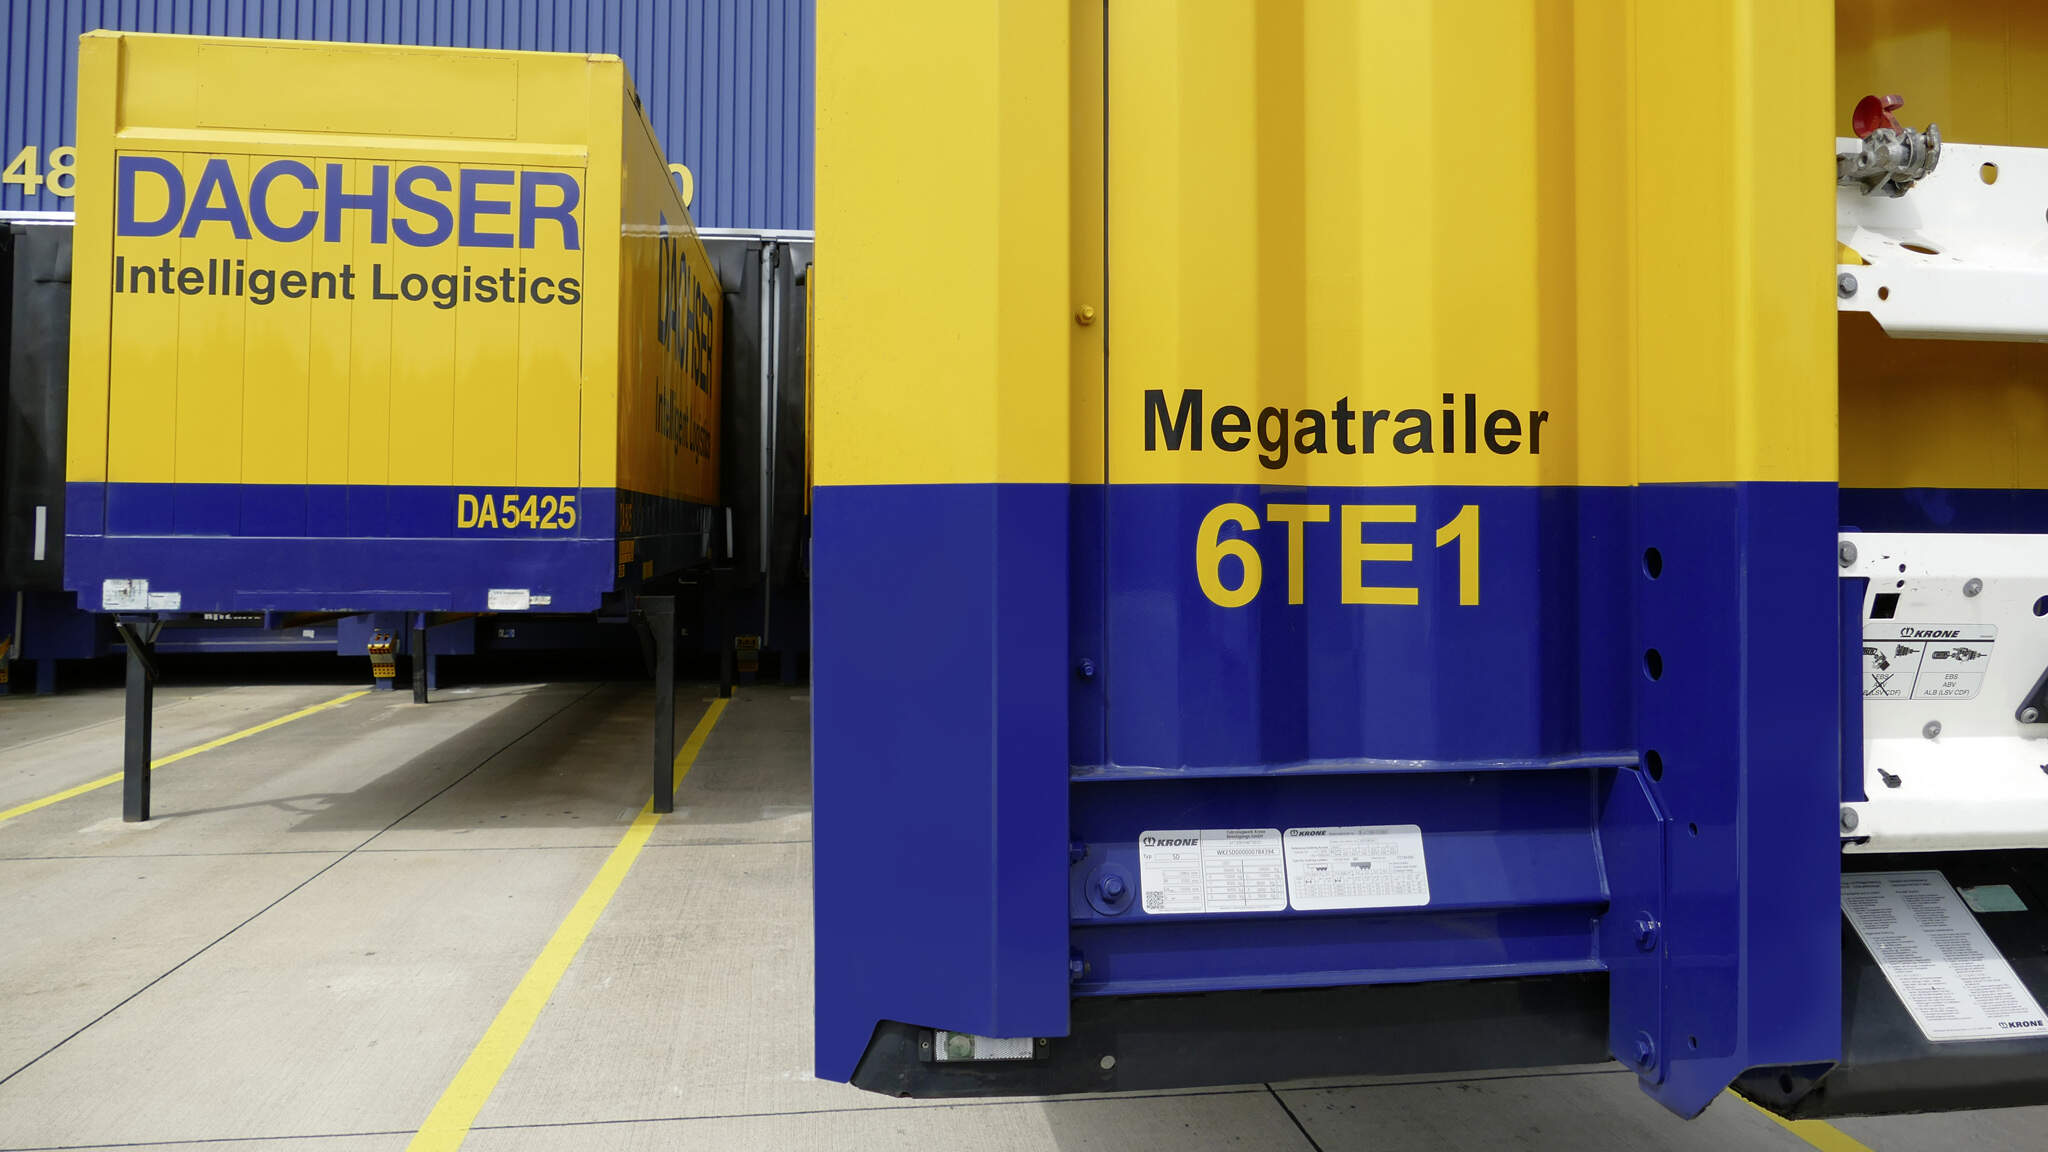 Successive conversion of semitrailers in the European Logistics business line optimizes capacity utilization and at the same time improves the climate footprint of transports